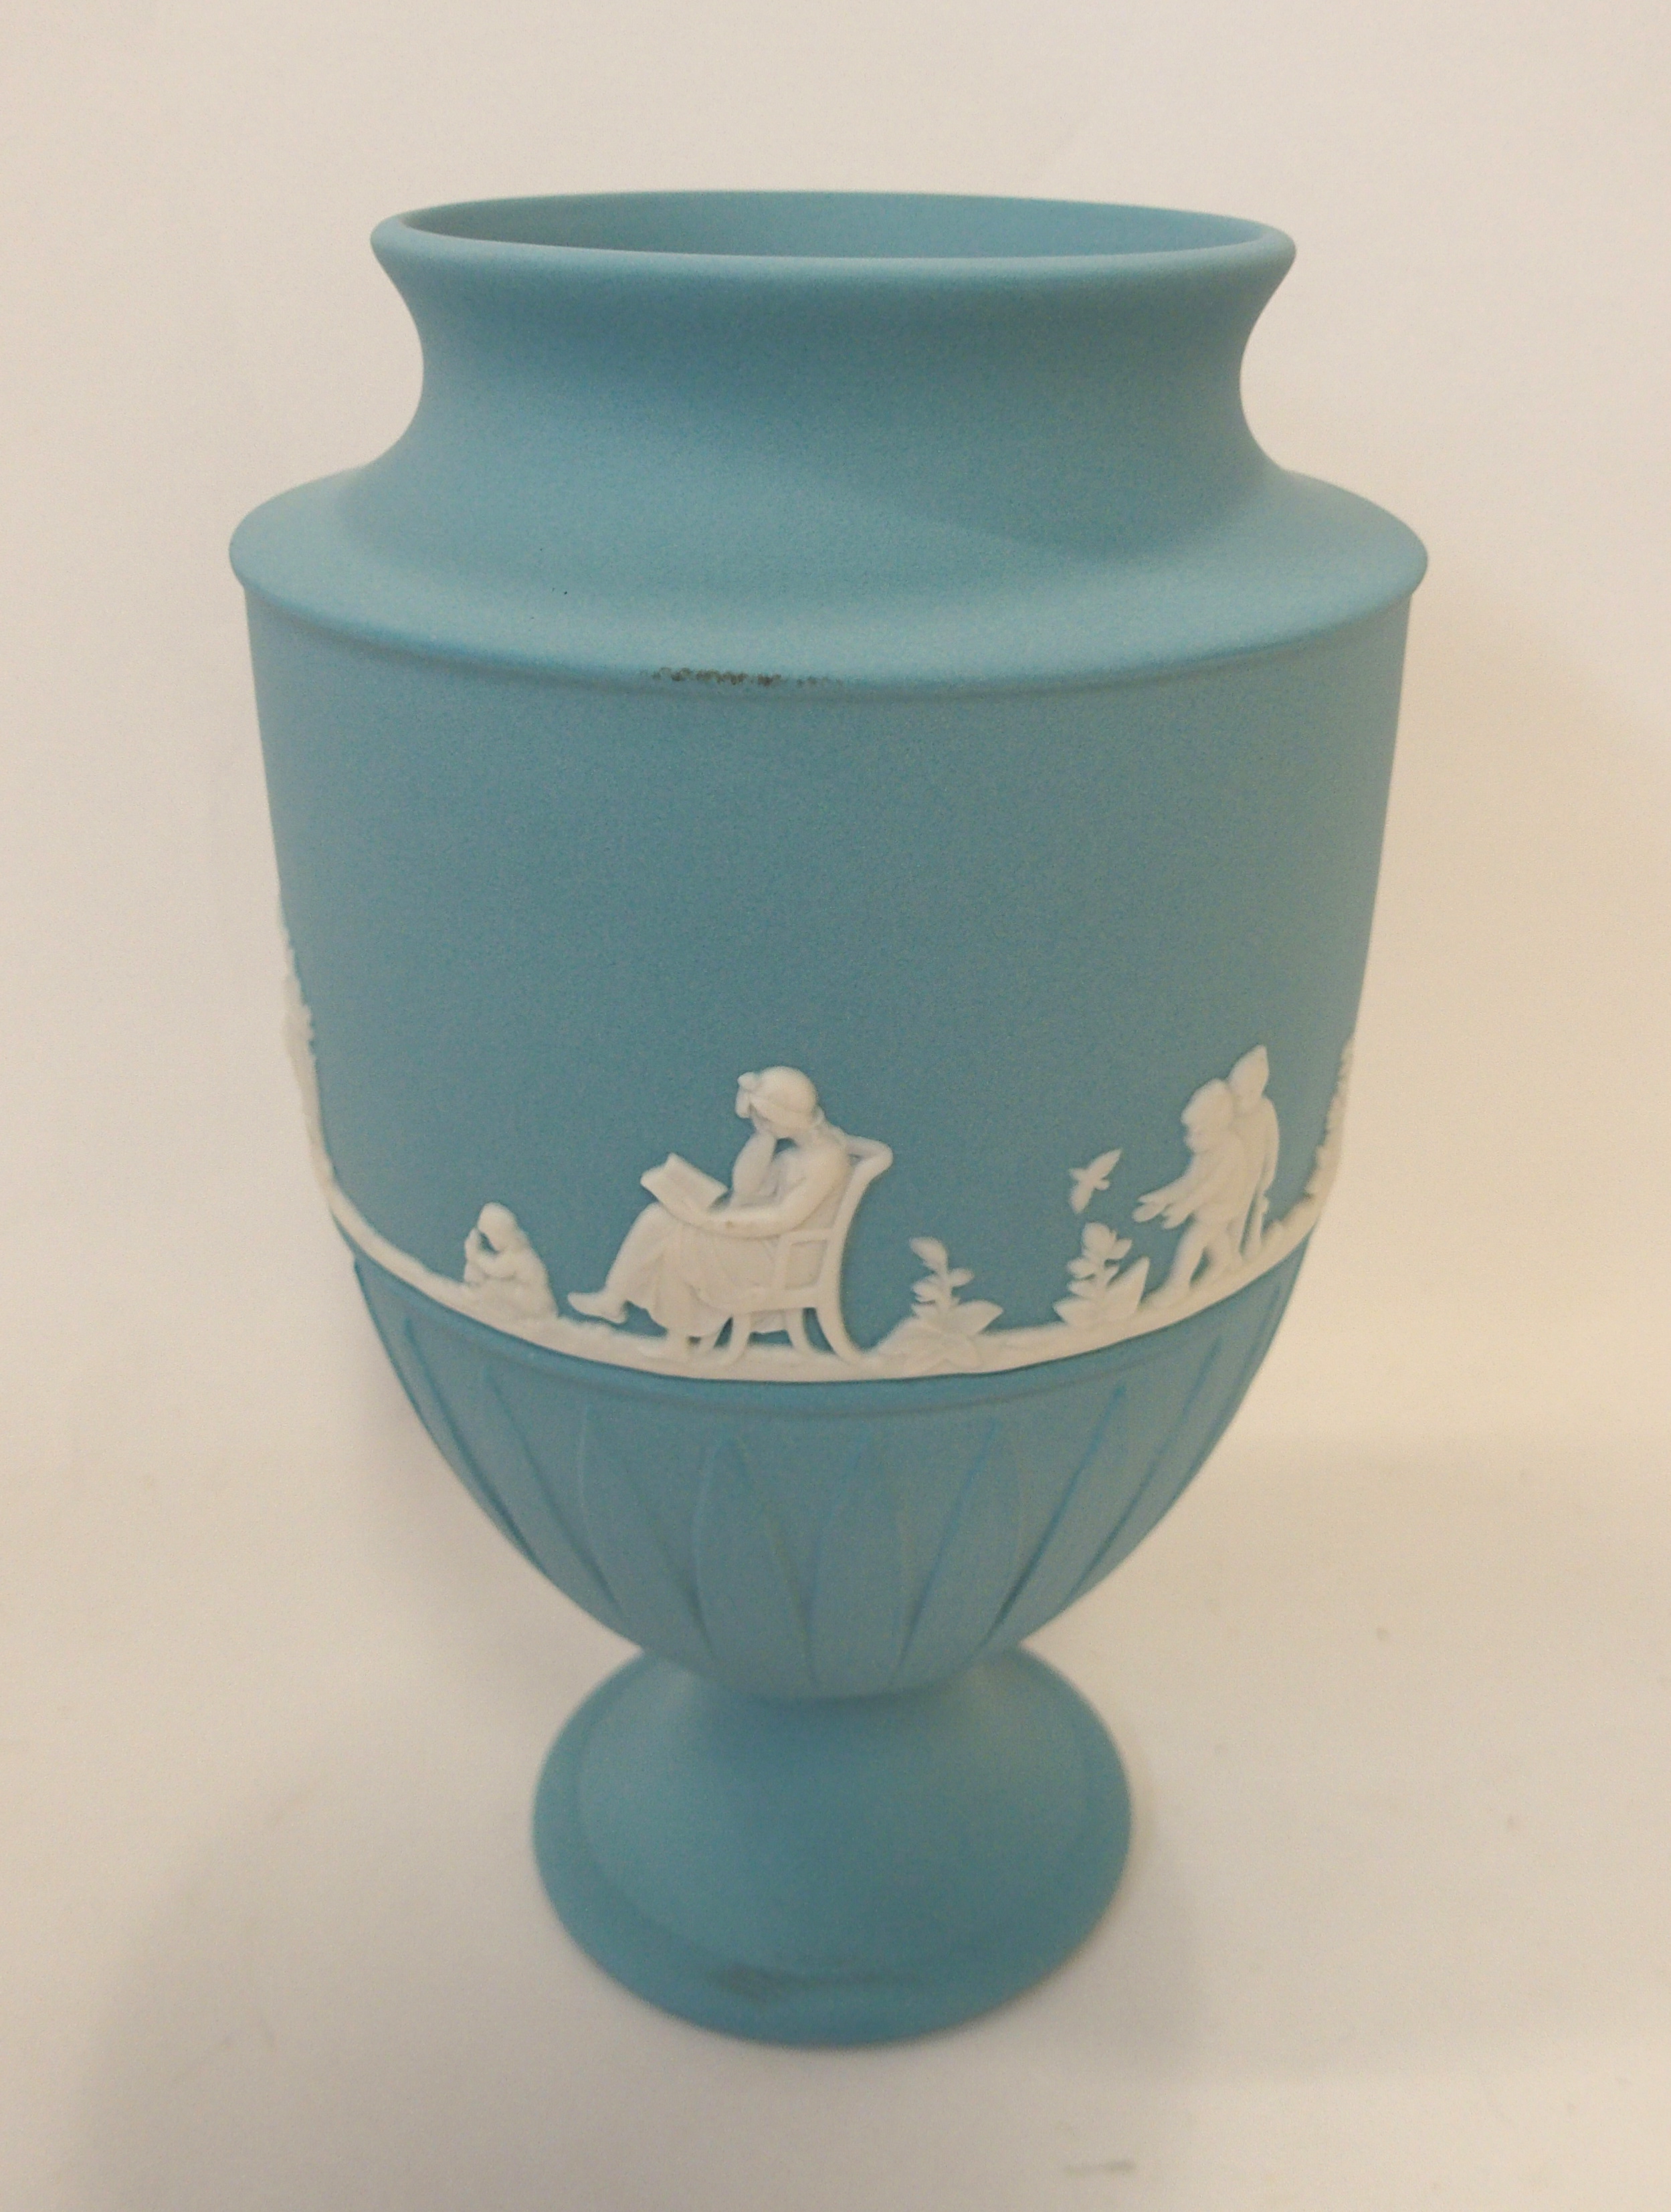 A Wedgwood classic vase, in white on turquoise, 20cm high, with box, a Portmeirion vase 'Sapphire' - Image 5 of 6